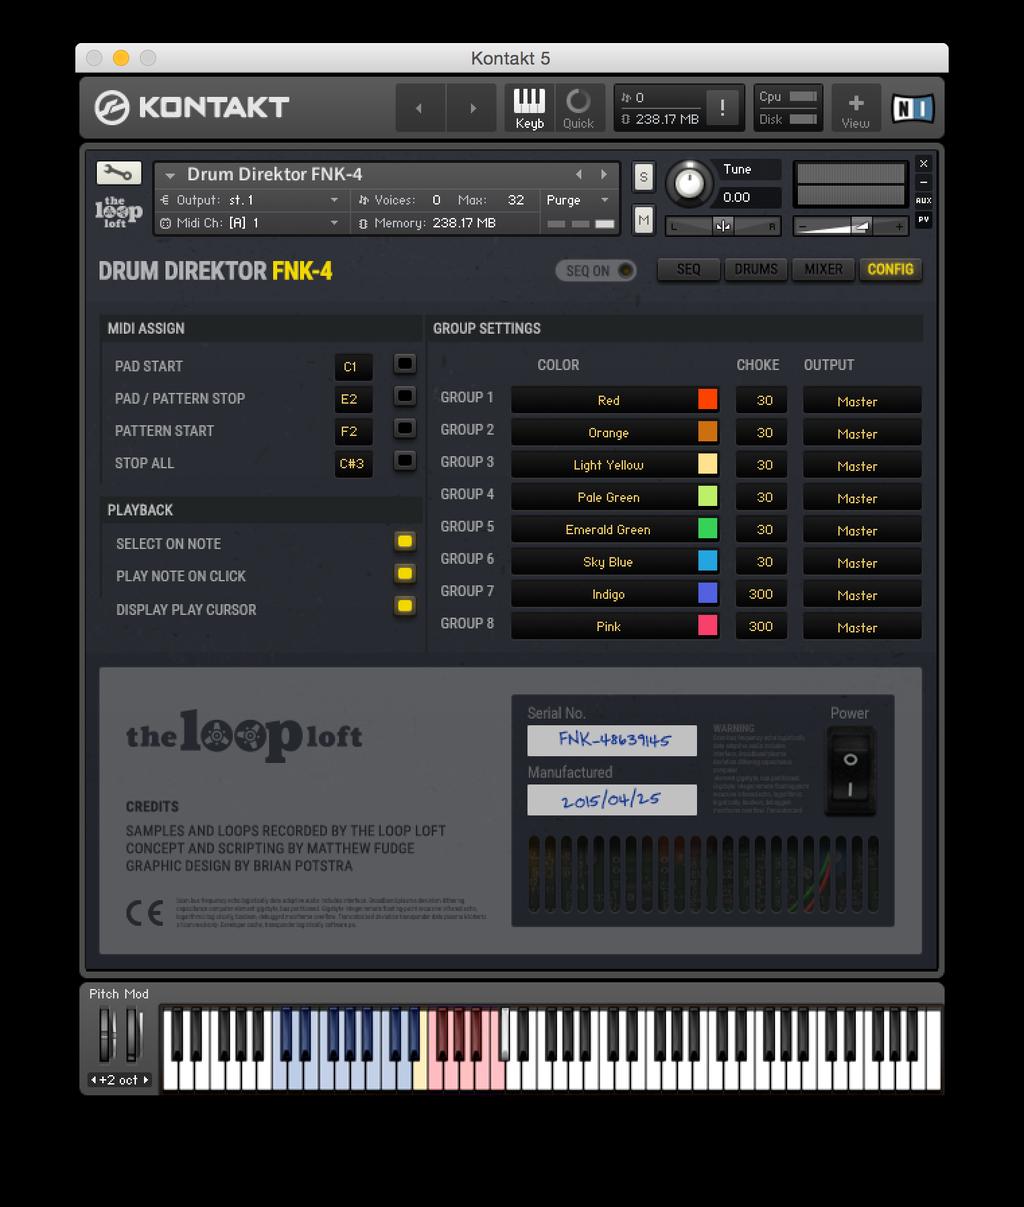 Drum Direktor : Config The config panel allows for the configuration of MIDI, Playback and Group Settings.